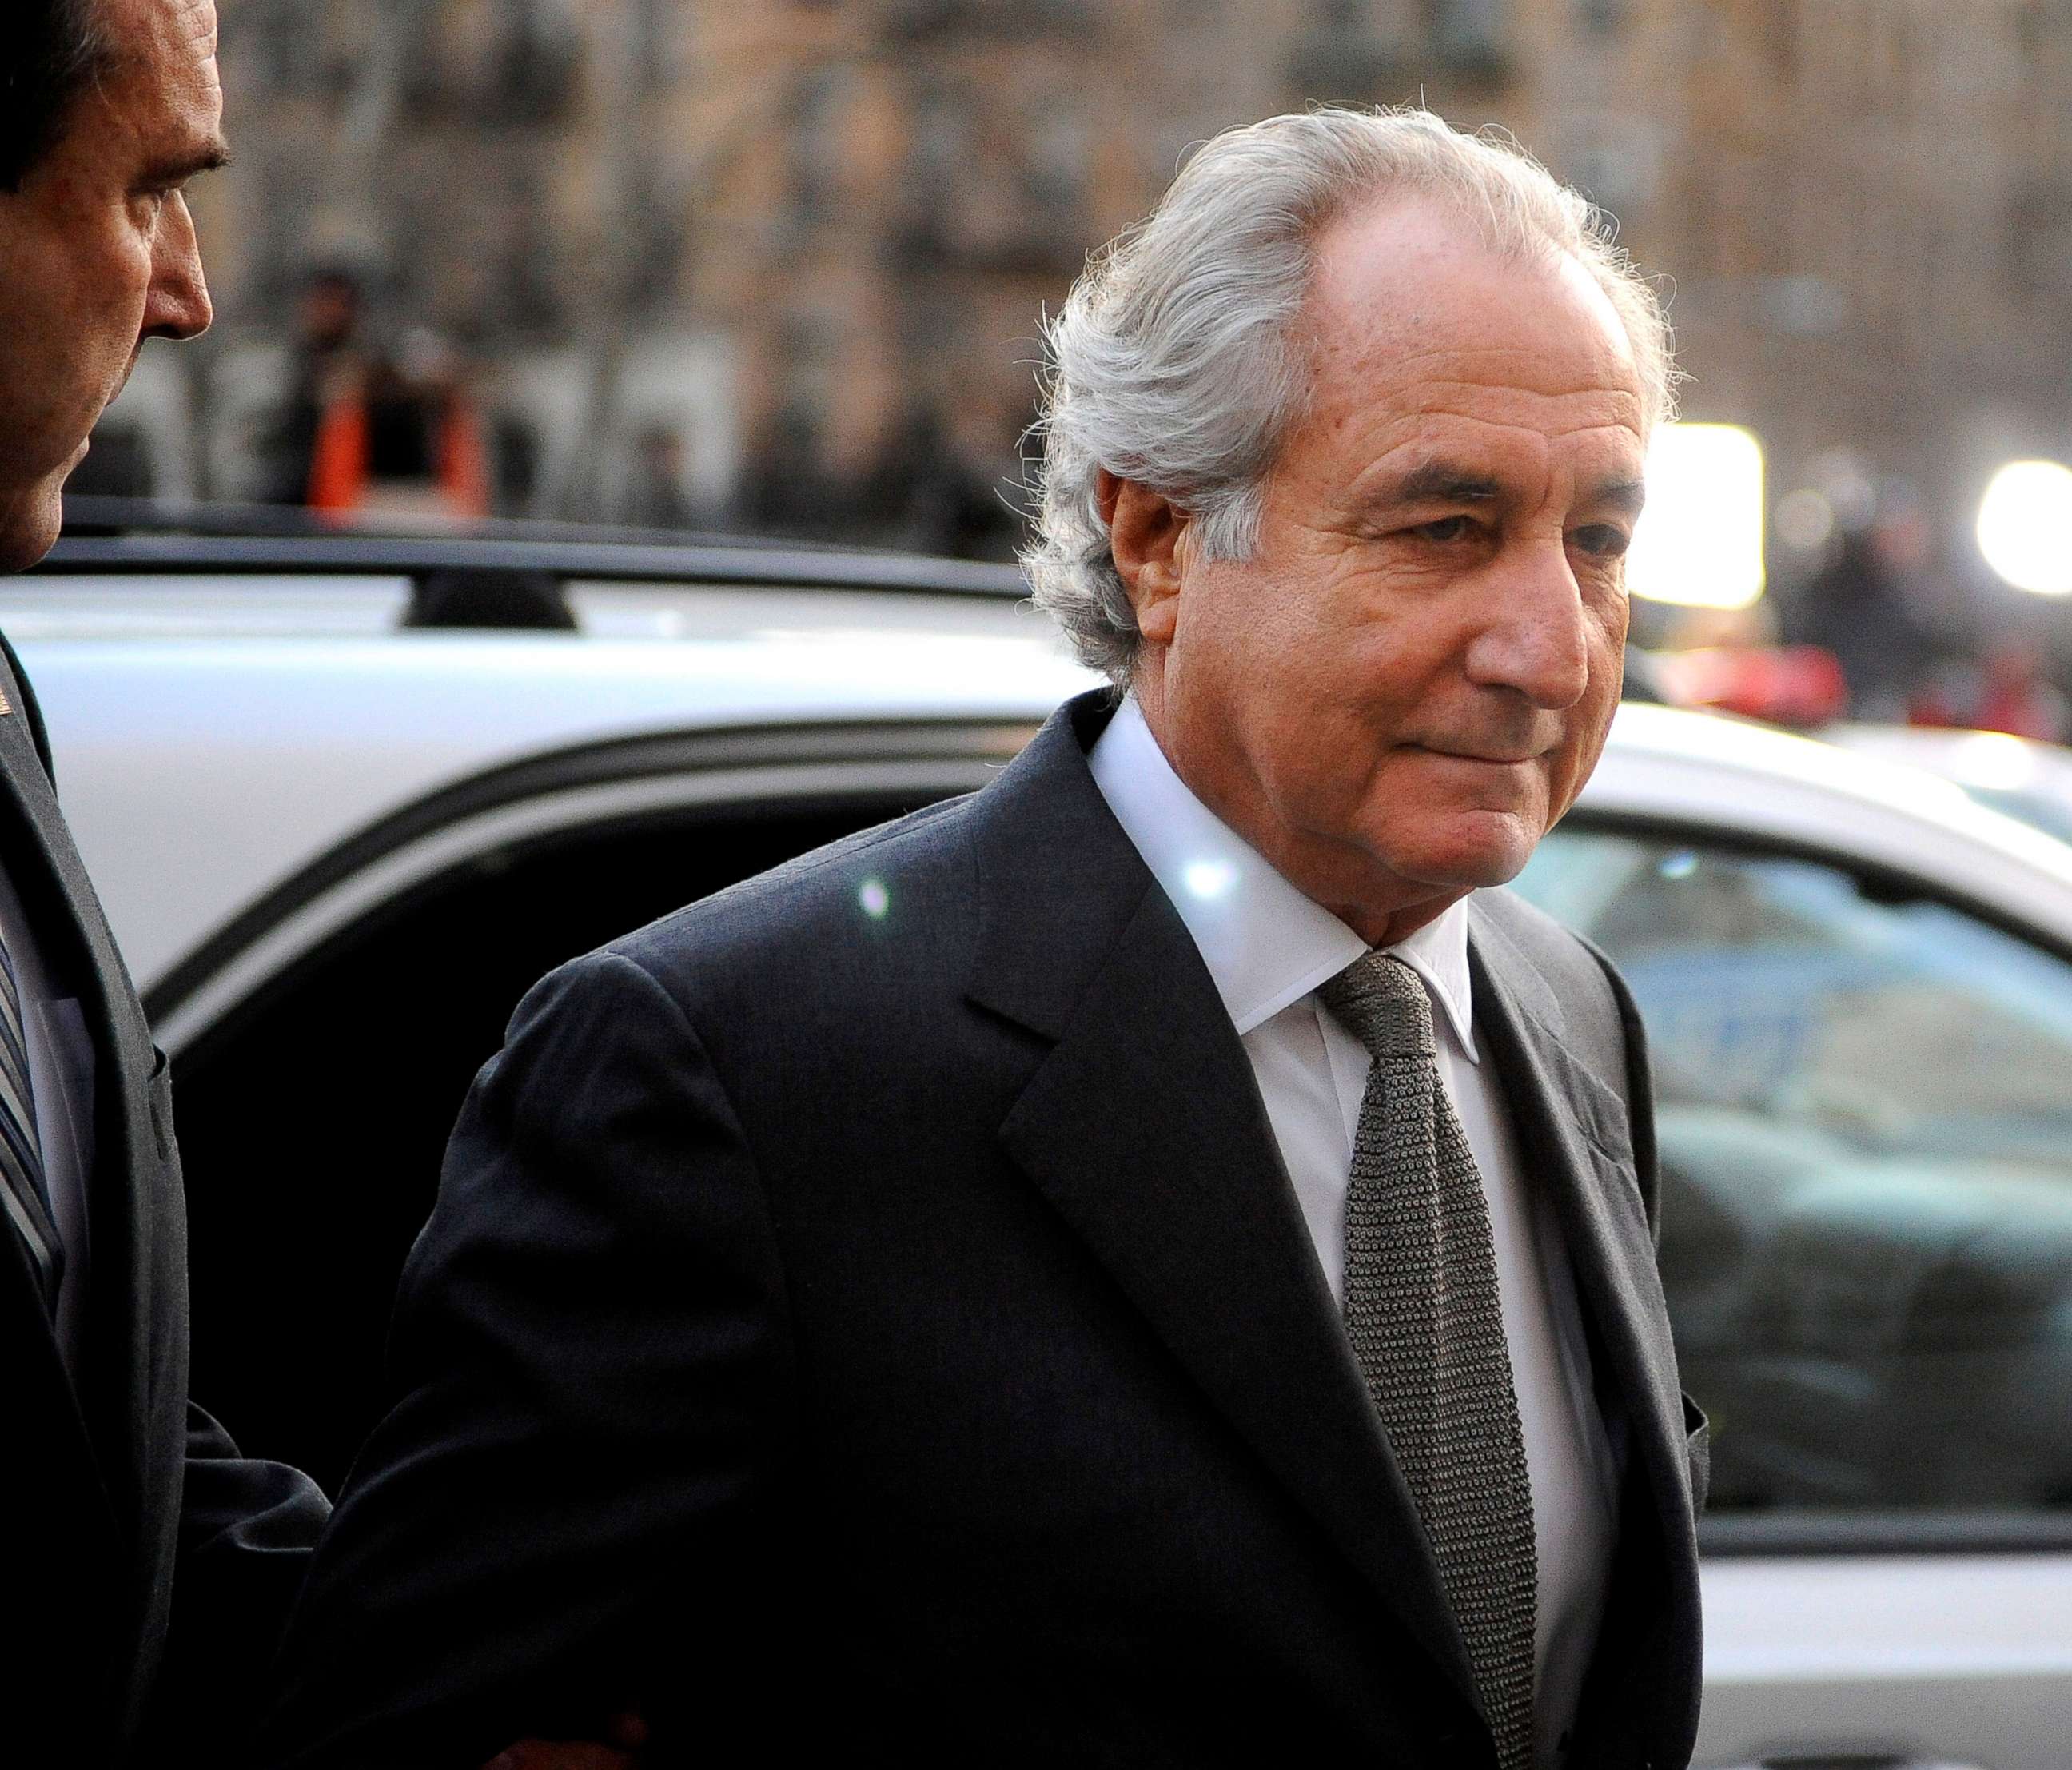 PHOTO: In this March 12, 2009, file photo, Bernard Madoff arrives at Manhattan Federal court in New York.